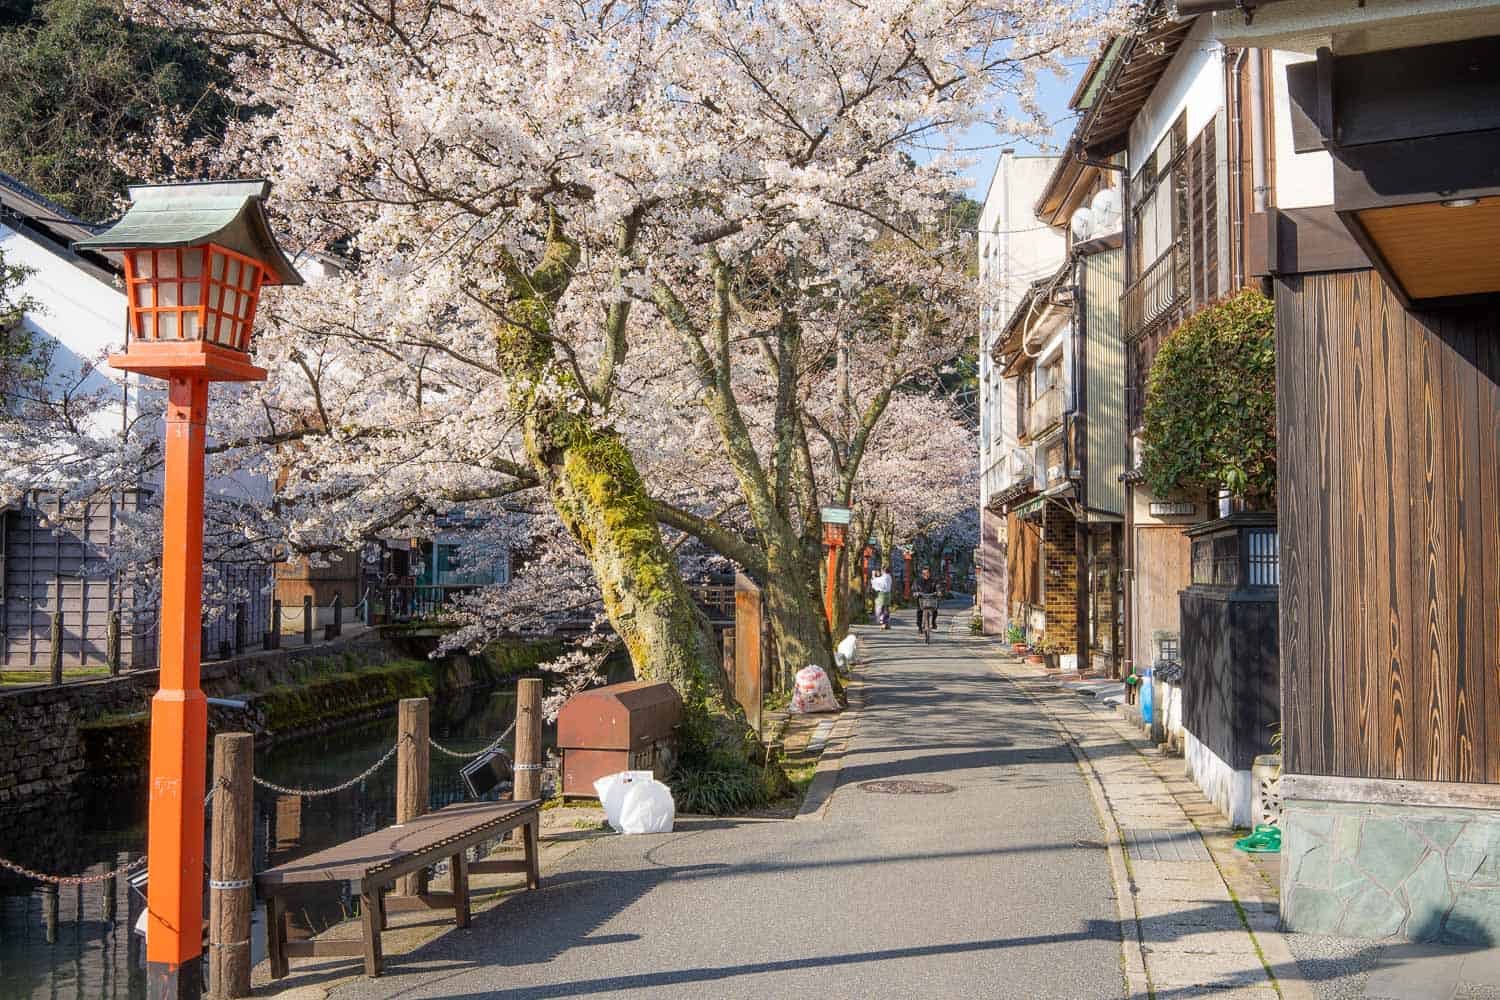 A guide to Kinosaki Onsen, one of the best onsen towns in Japan